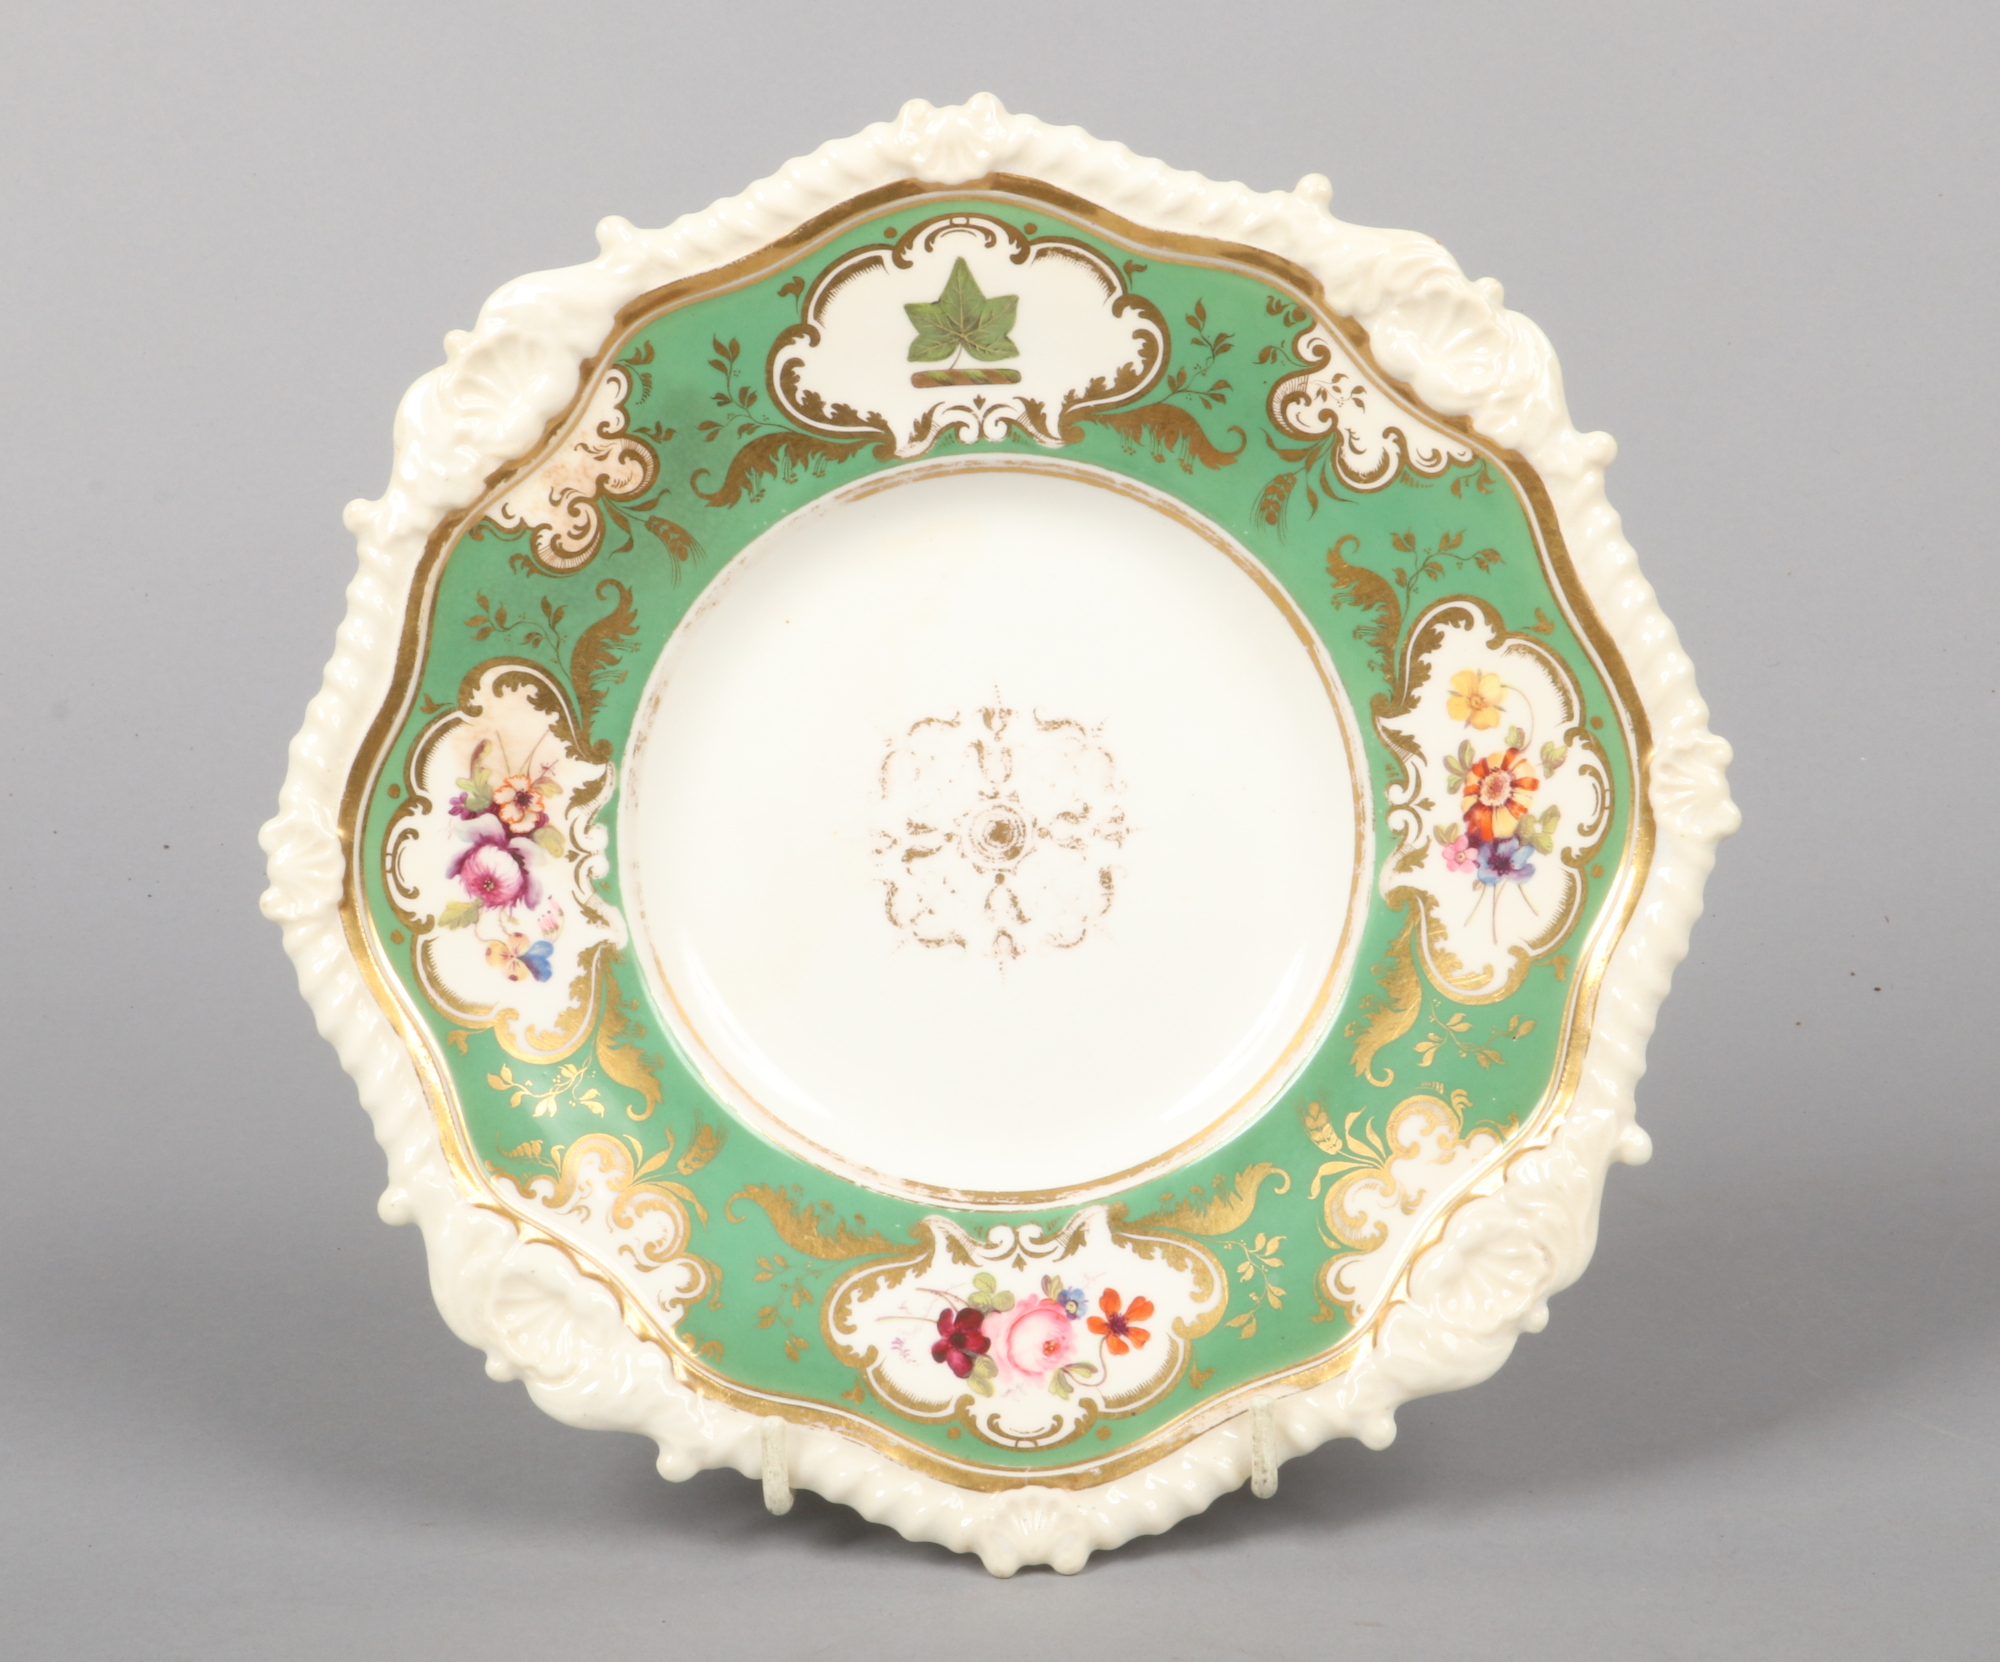 A Rockingham armorial dessert plate with shell and gadroon moulding. Having green ground border with